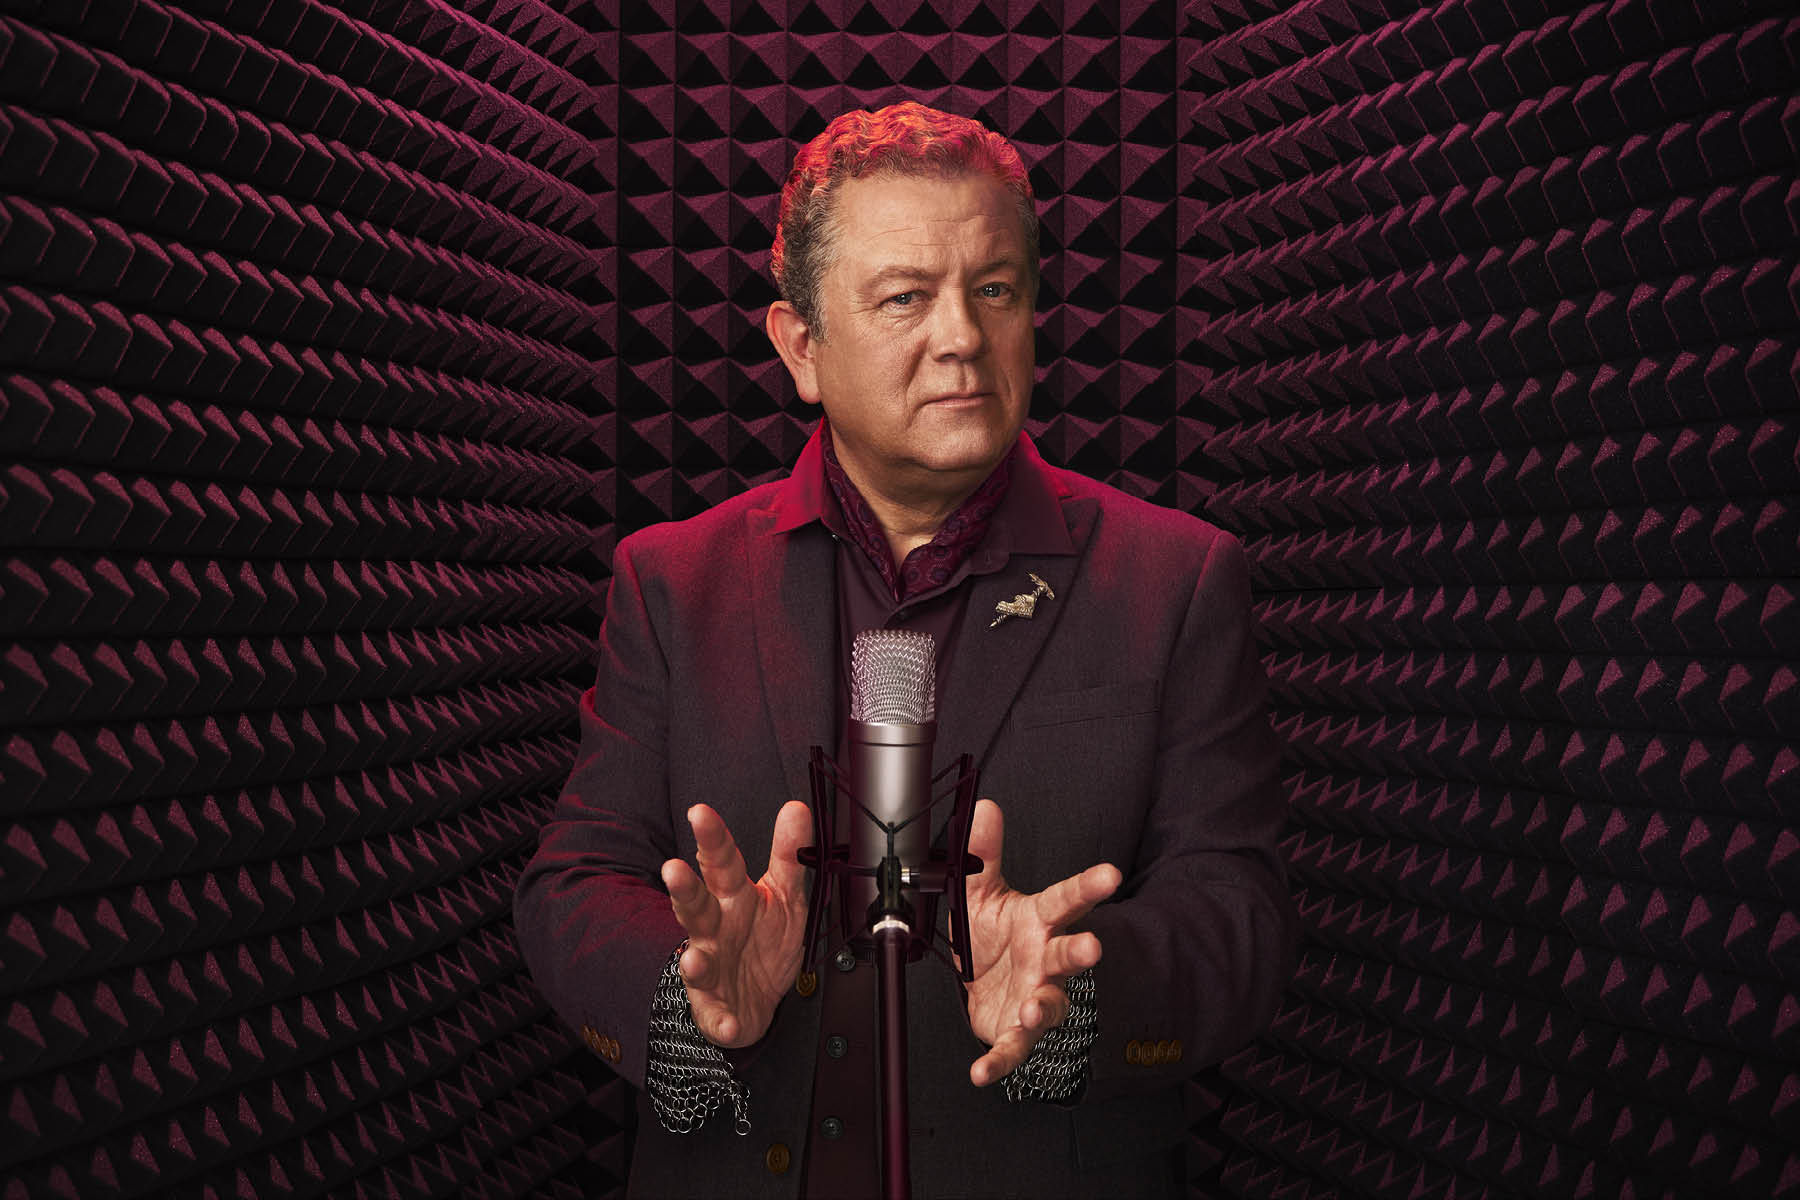 Picture of Jon Culshaw against a black and red lit background